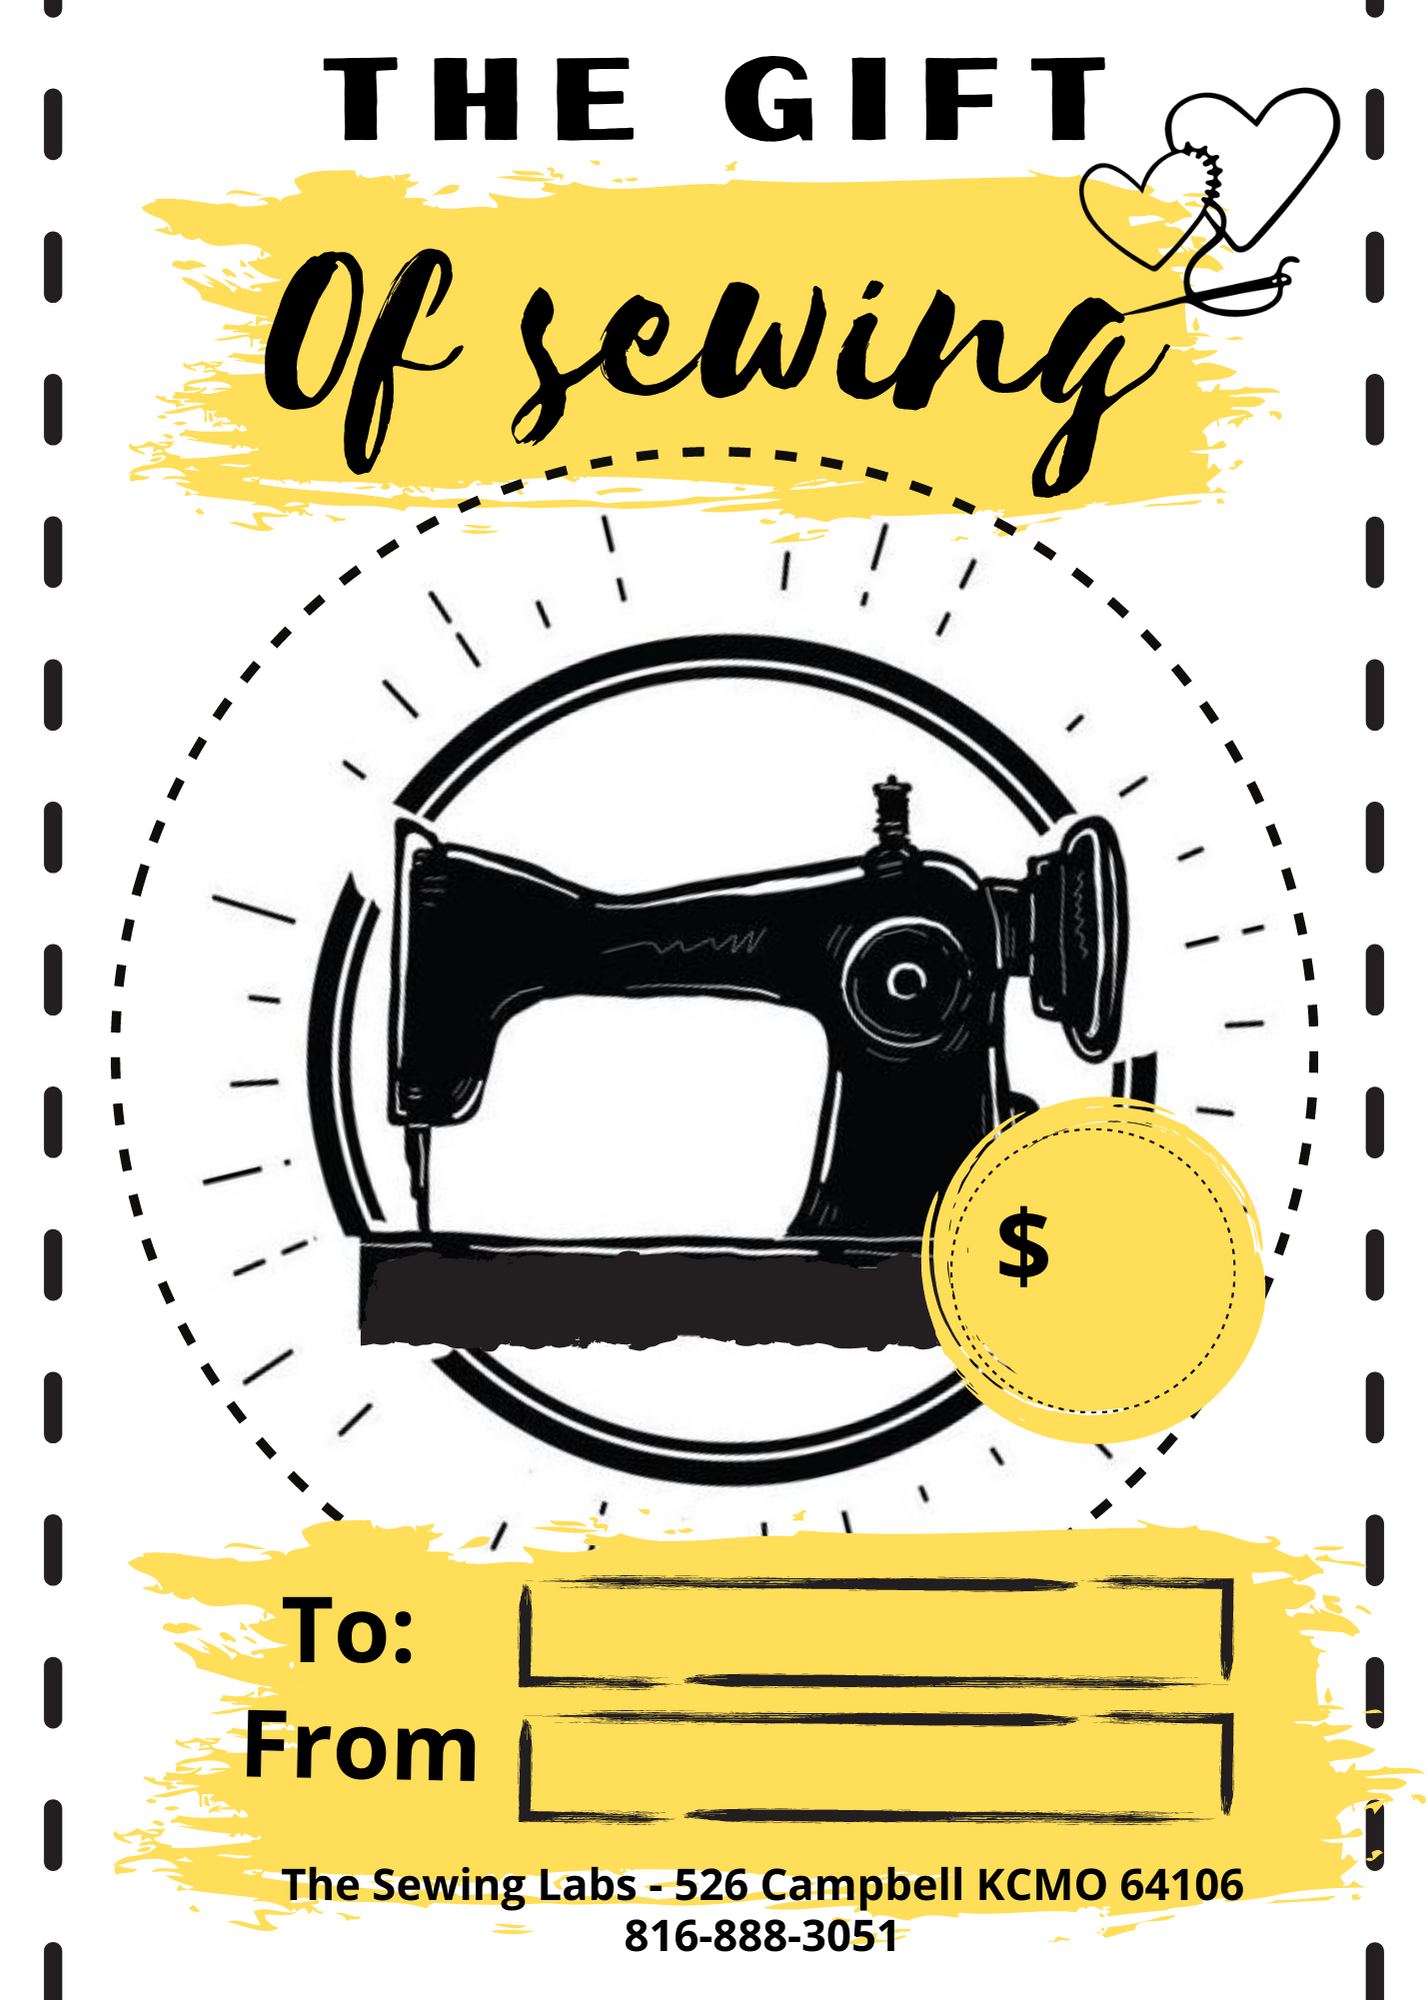 The Gift of Sewing - Gift Certificate